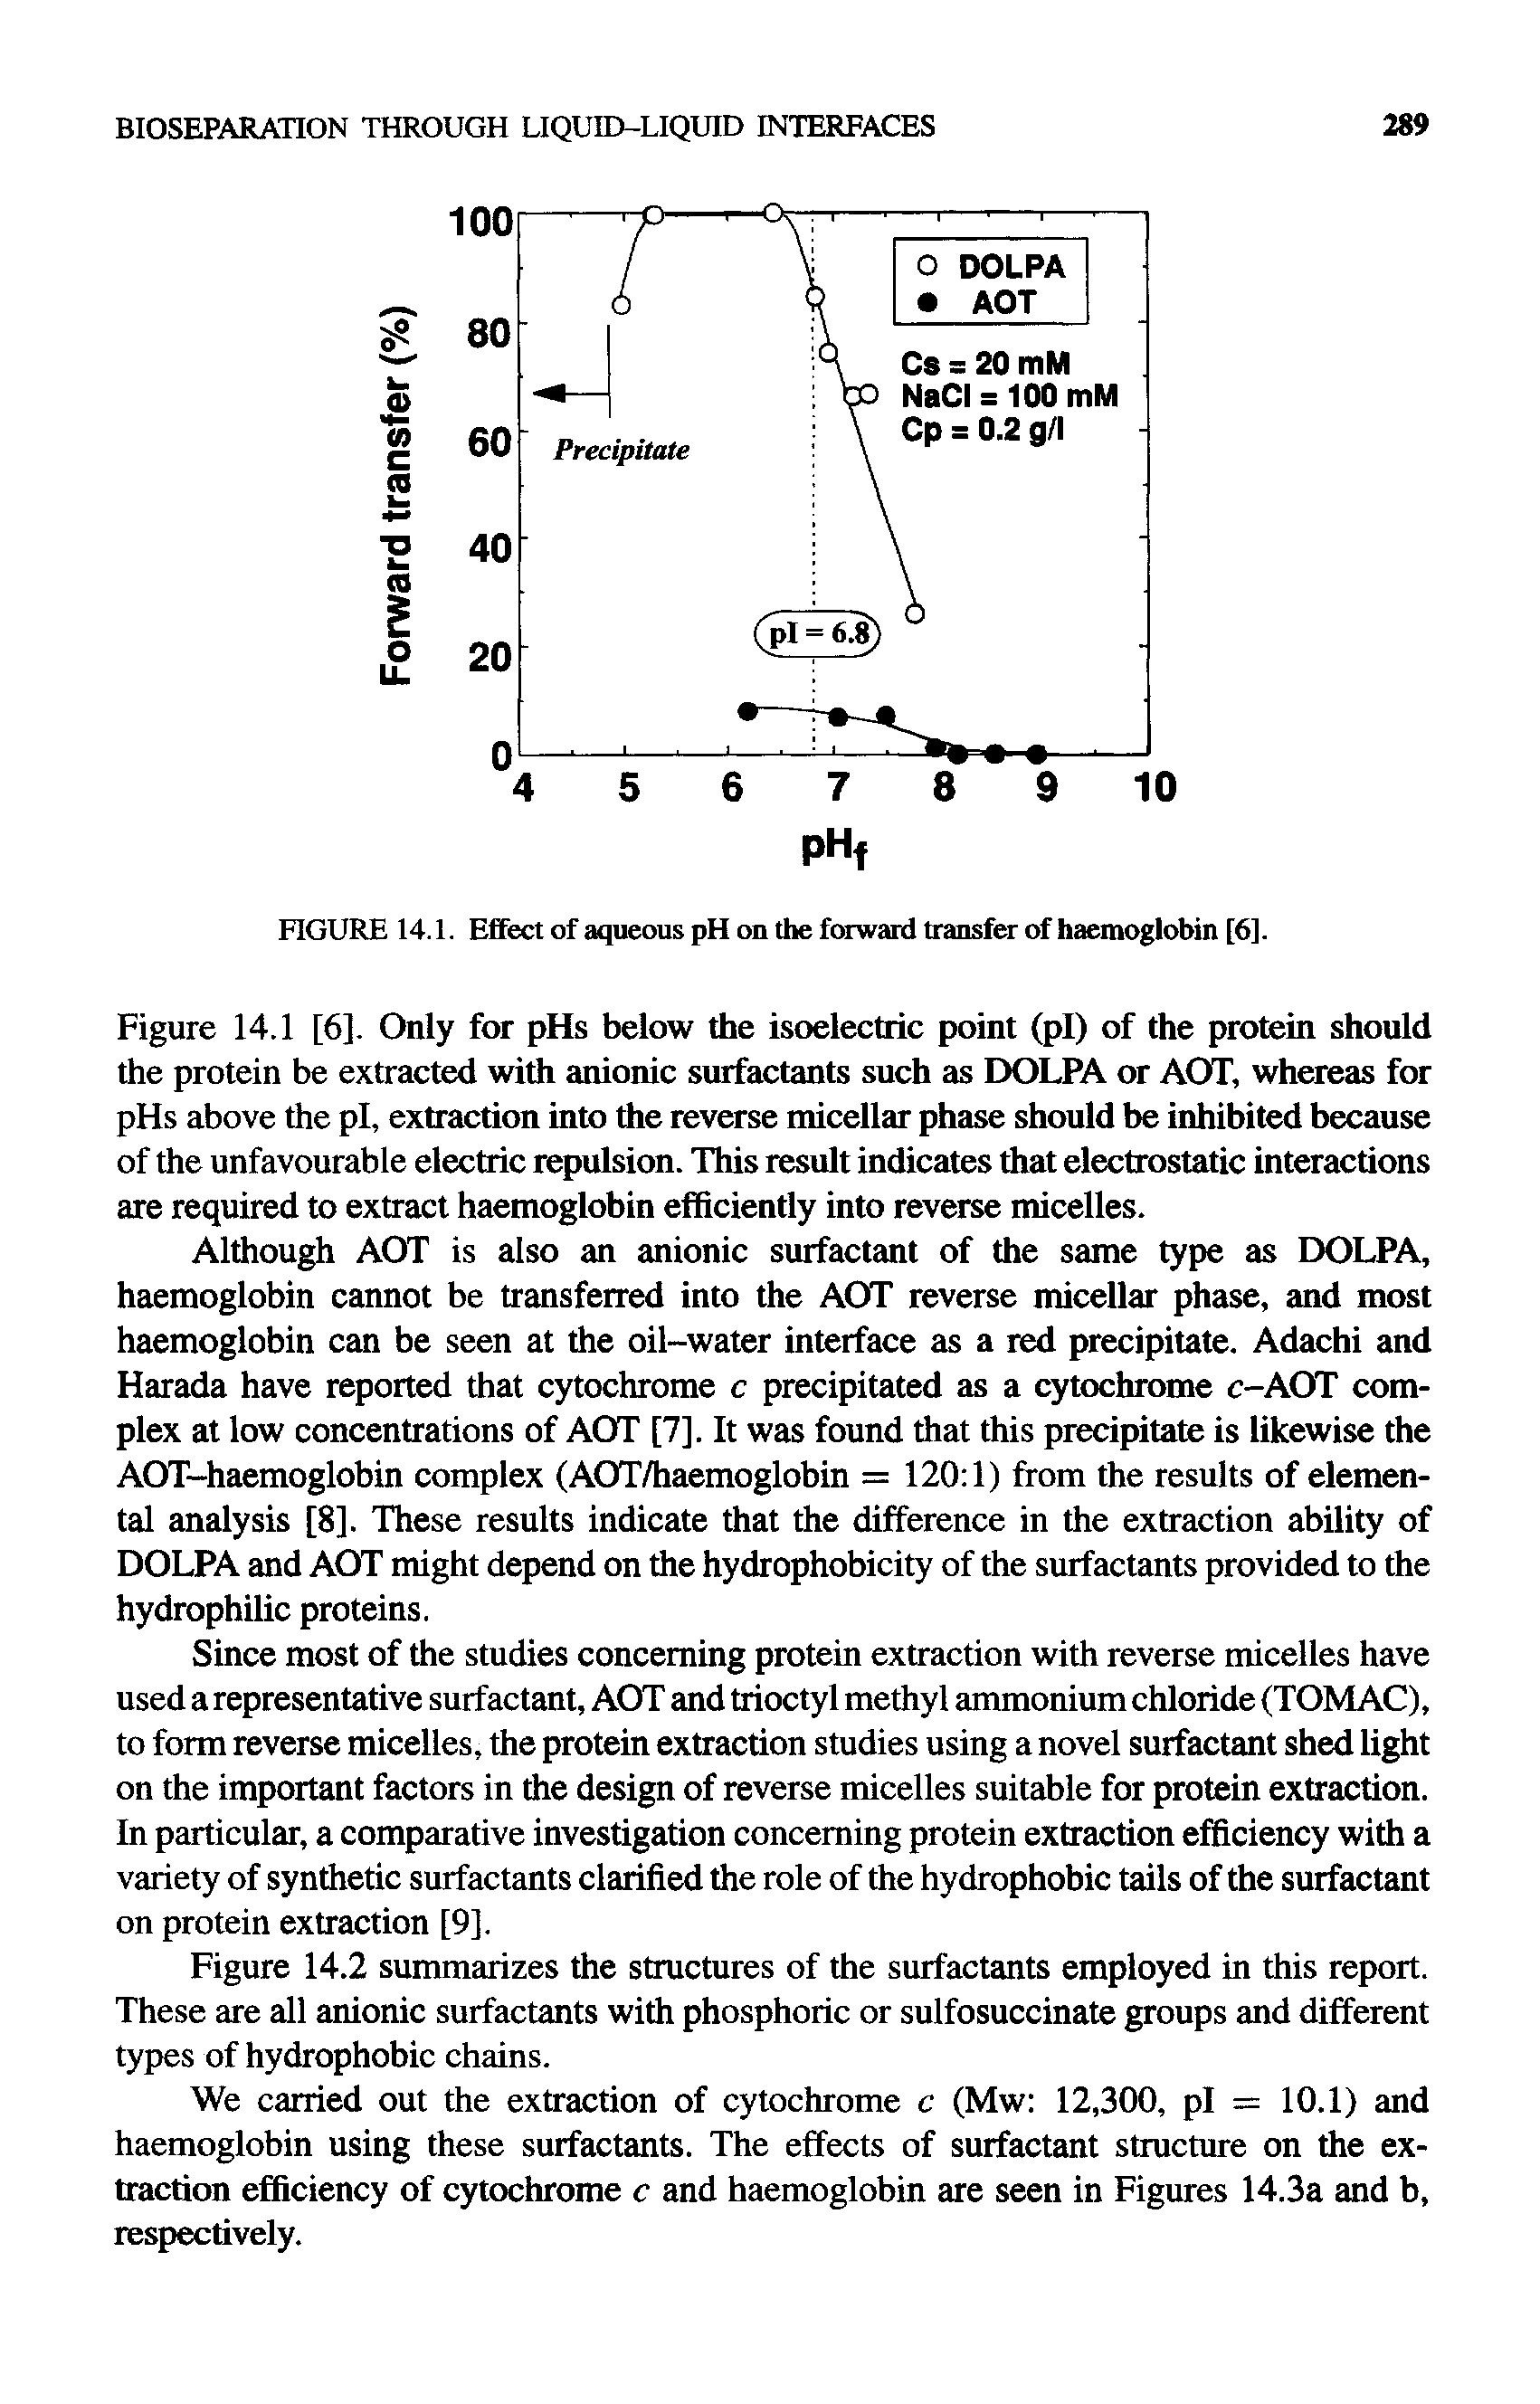 Figure 14.1 [6]. Only for pHs below the isoelectric point (pi) of the protein should the protein be extracted with anionic surfactants such as DOLPA or AOT, whereas for pHs above the pi, extraction into the reverse micellar phase should be inhibited because of the unfavourable electric repulsion. This result indicates that electrostatic interactions are required to extract haemoglobin efficiently into reverse micelles.